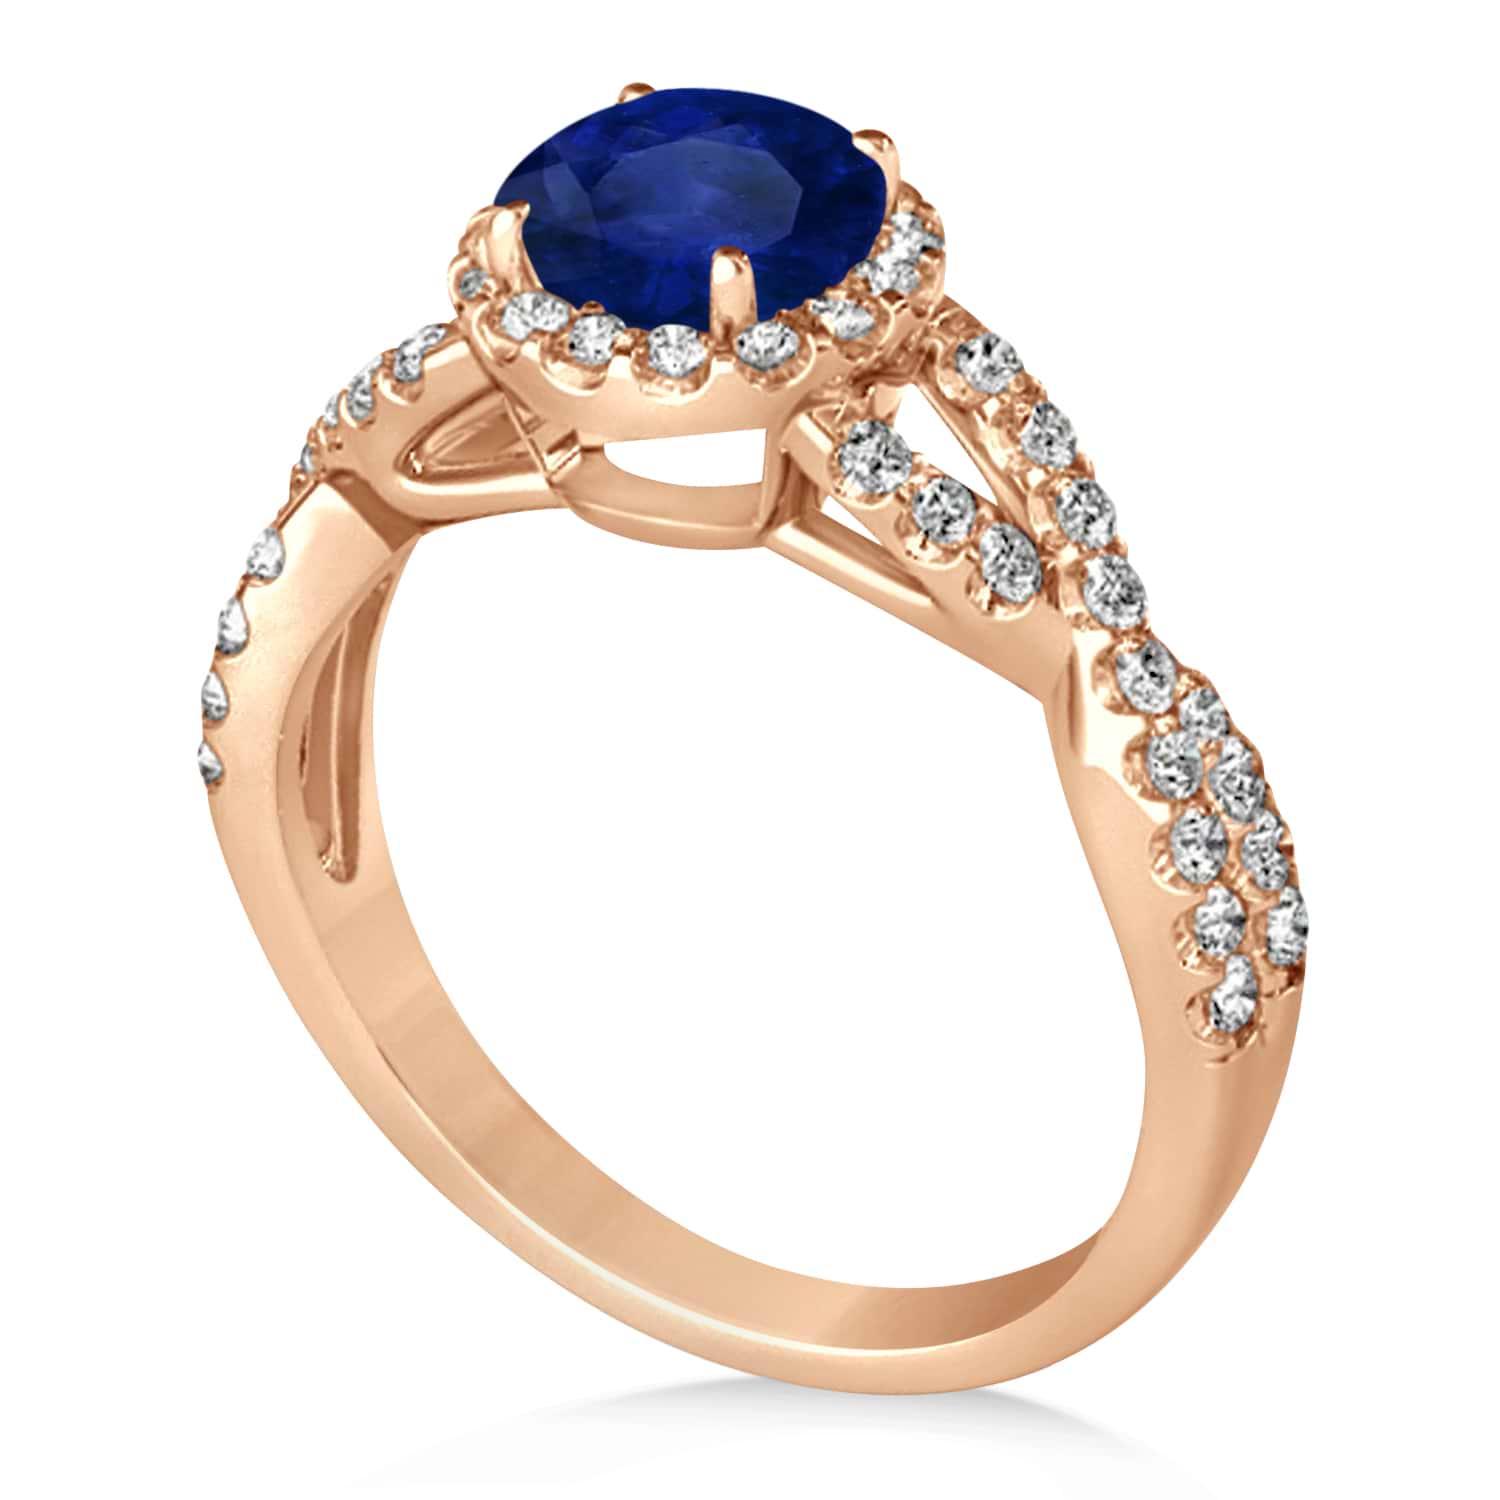 Blue Sapphire & Diamond Twisted Engagement Ring 18k Rose Gold 1.55ct